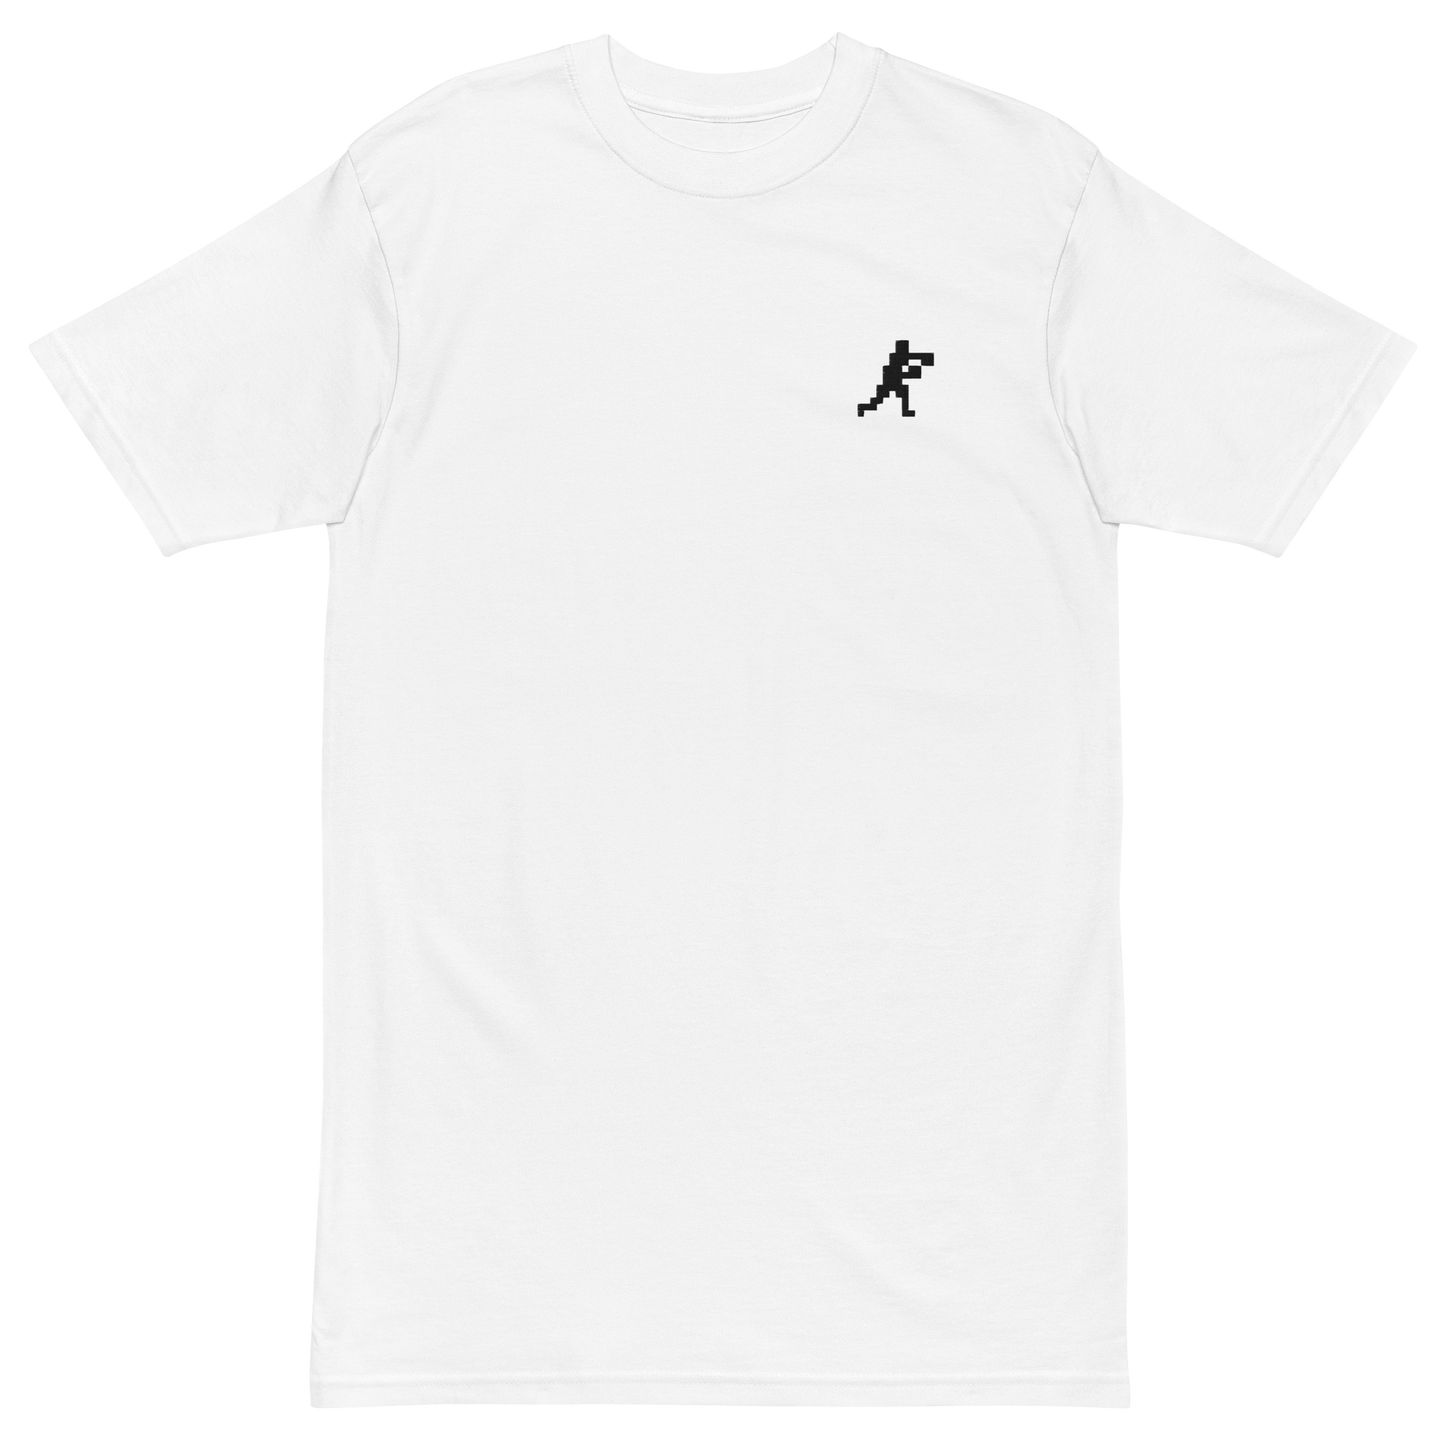 NFTee - Embroidered (White)